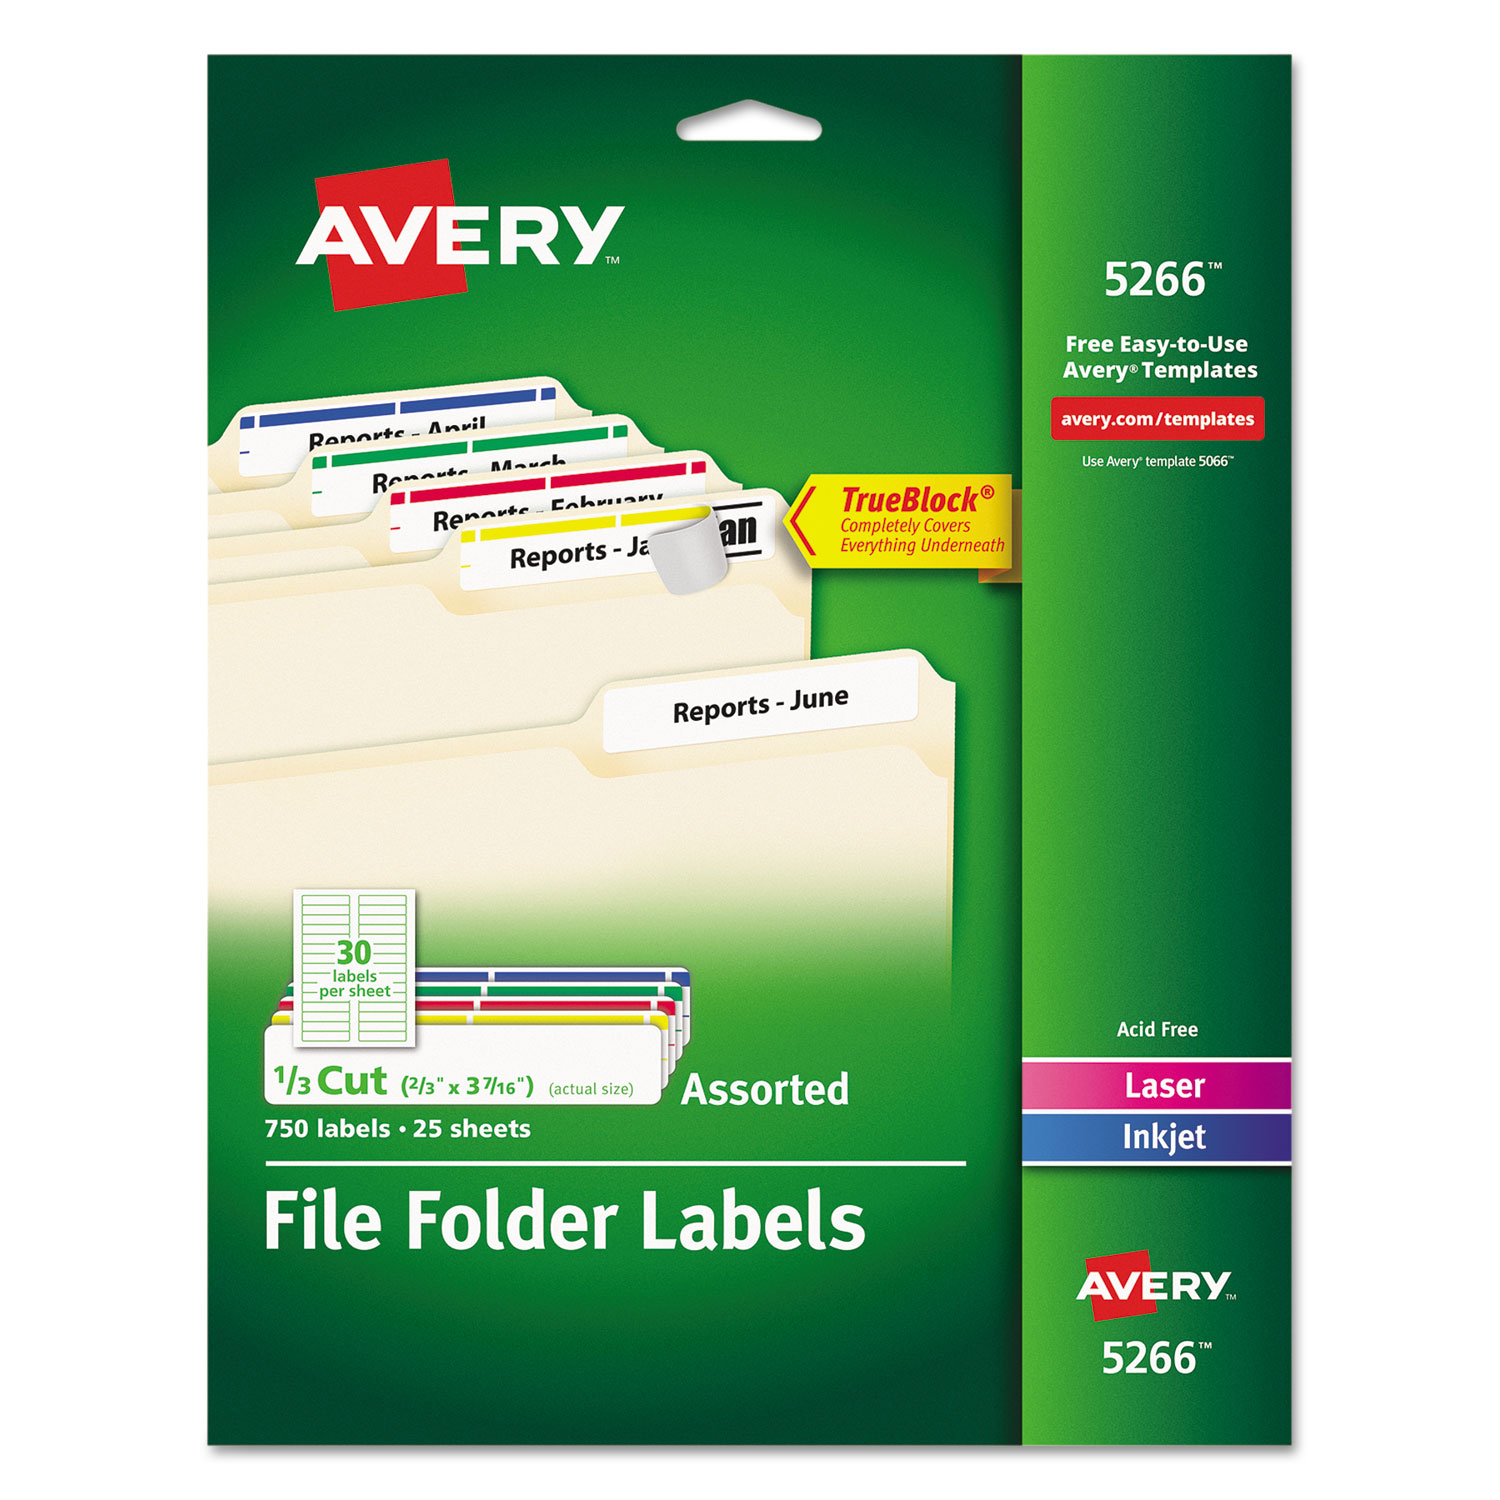 Shop for Permanent File Folder Labels with TrueBlock® Technology and